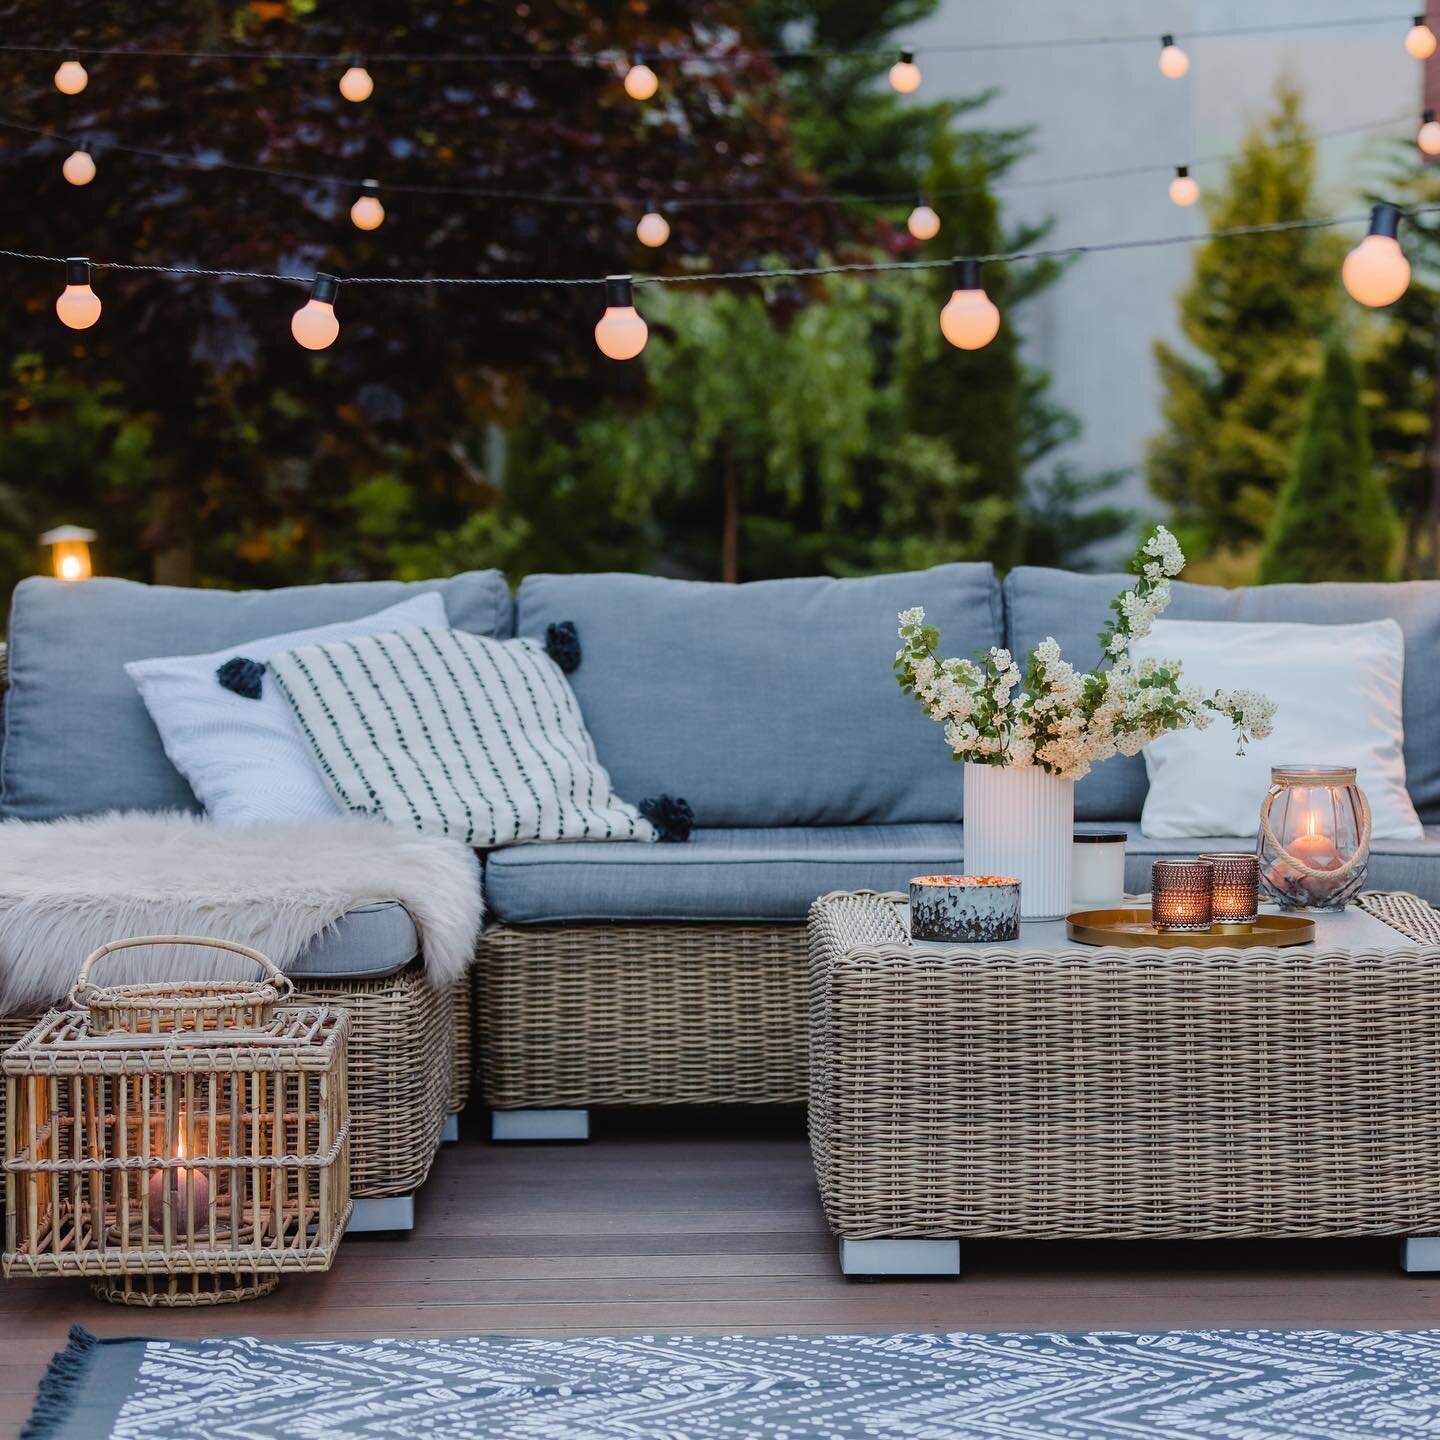 Happy Summer Solstice! In honor of the first day of Summer, we are sharing how to create the perfect outdoor space for the warm summer months ahead.

~ Create Comfortable Hangout Zones
Create distinct and meaningful zones that people will naturally g